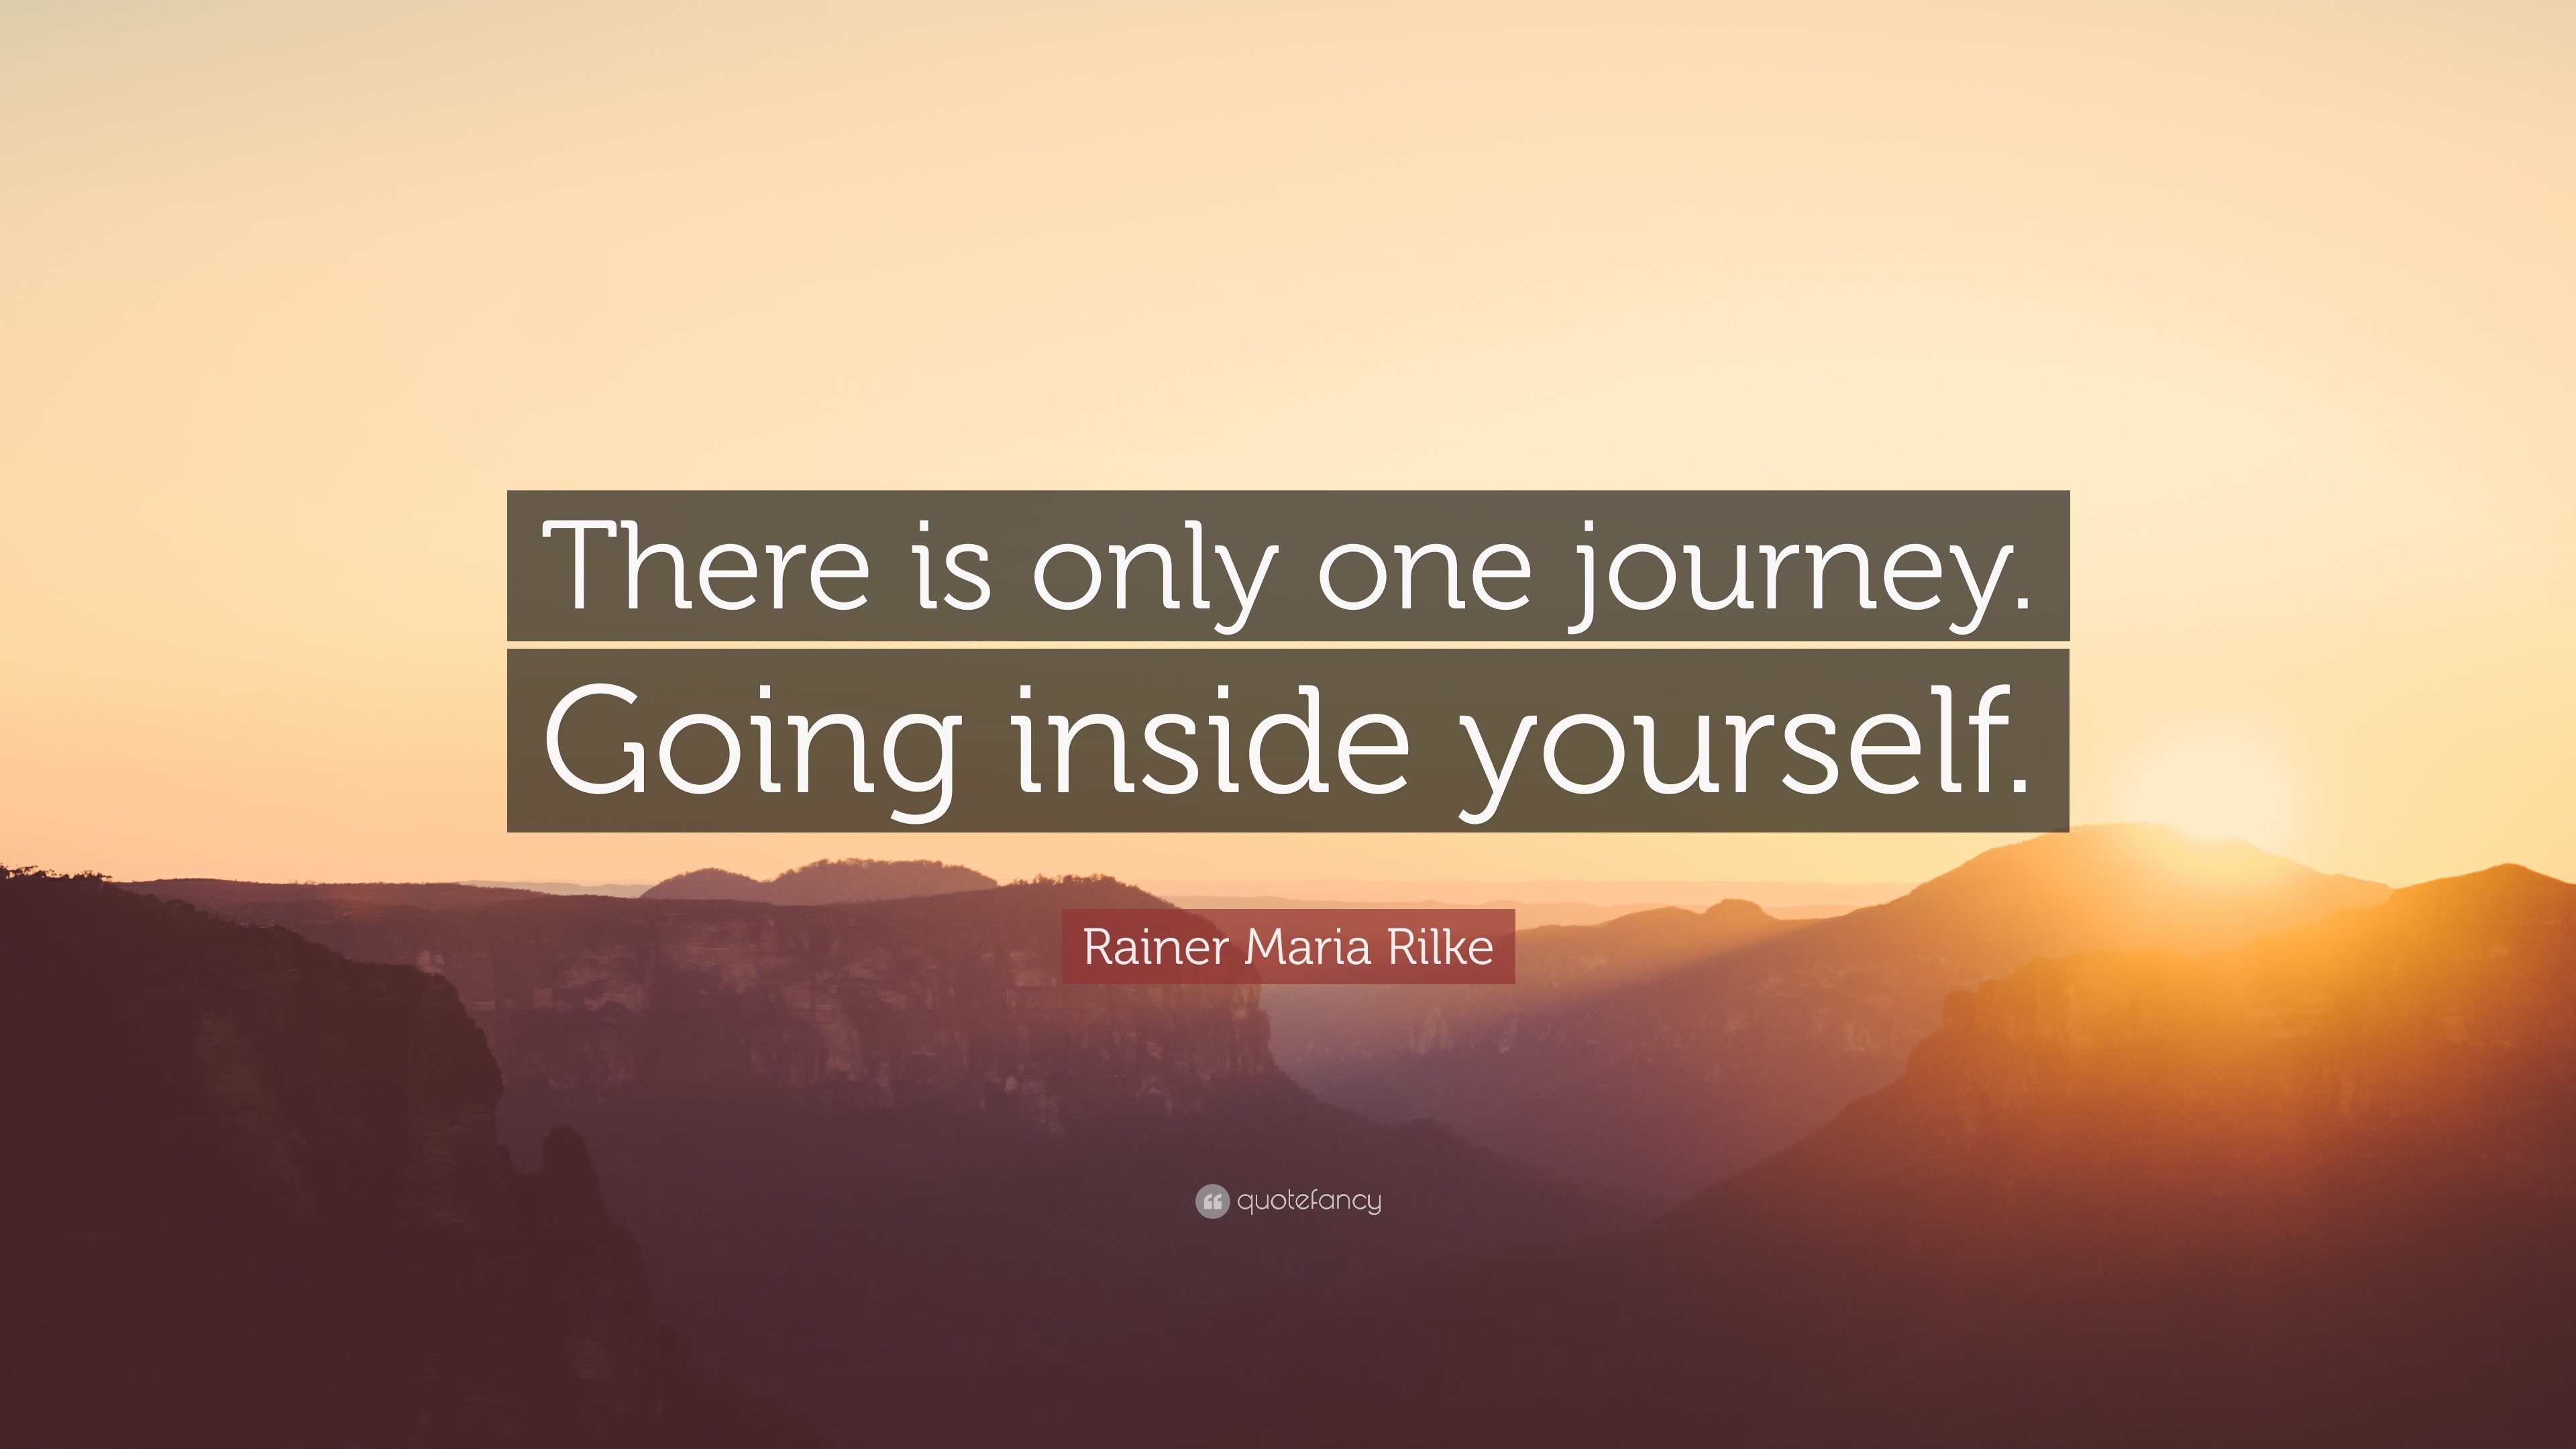 231276-Rainer-Maria-Rilke-Quote-There-is-only-one-journey-Going-inside.jpg